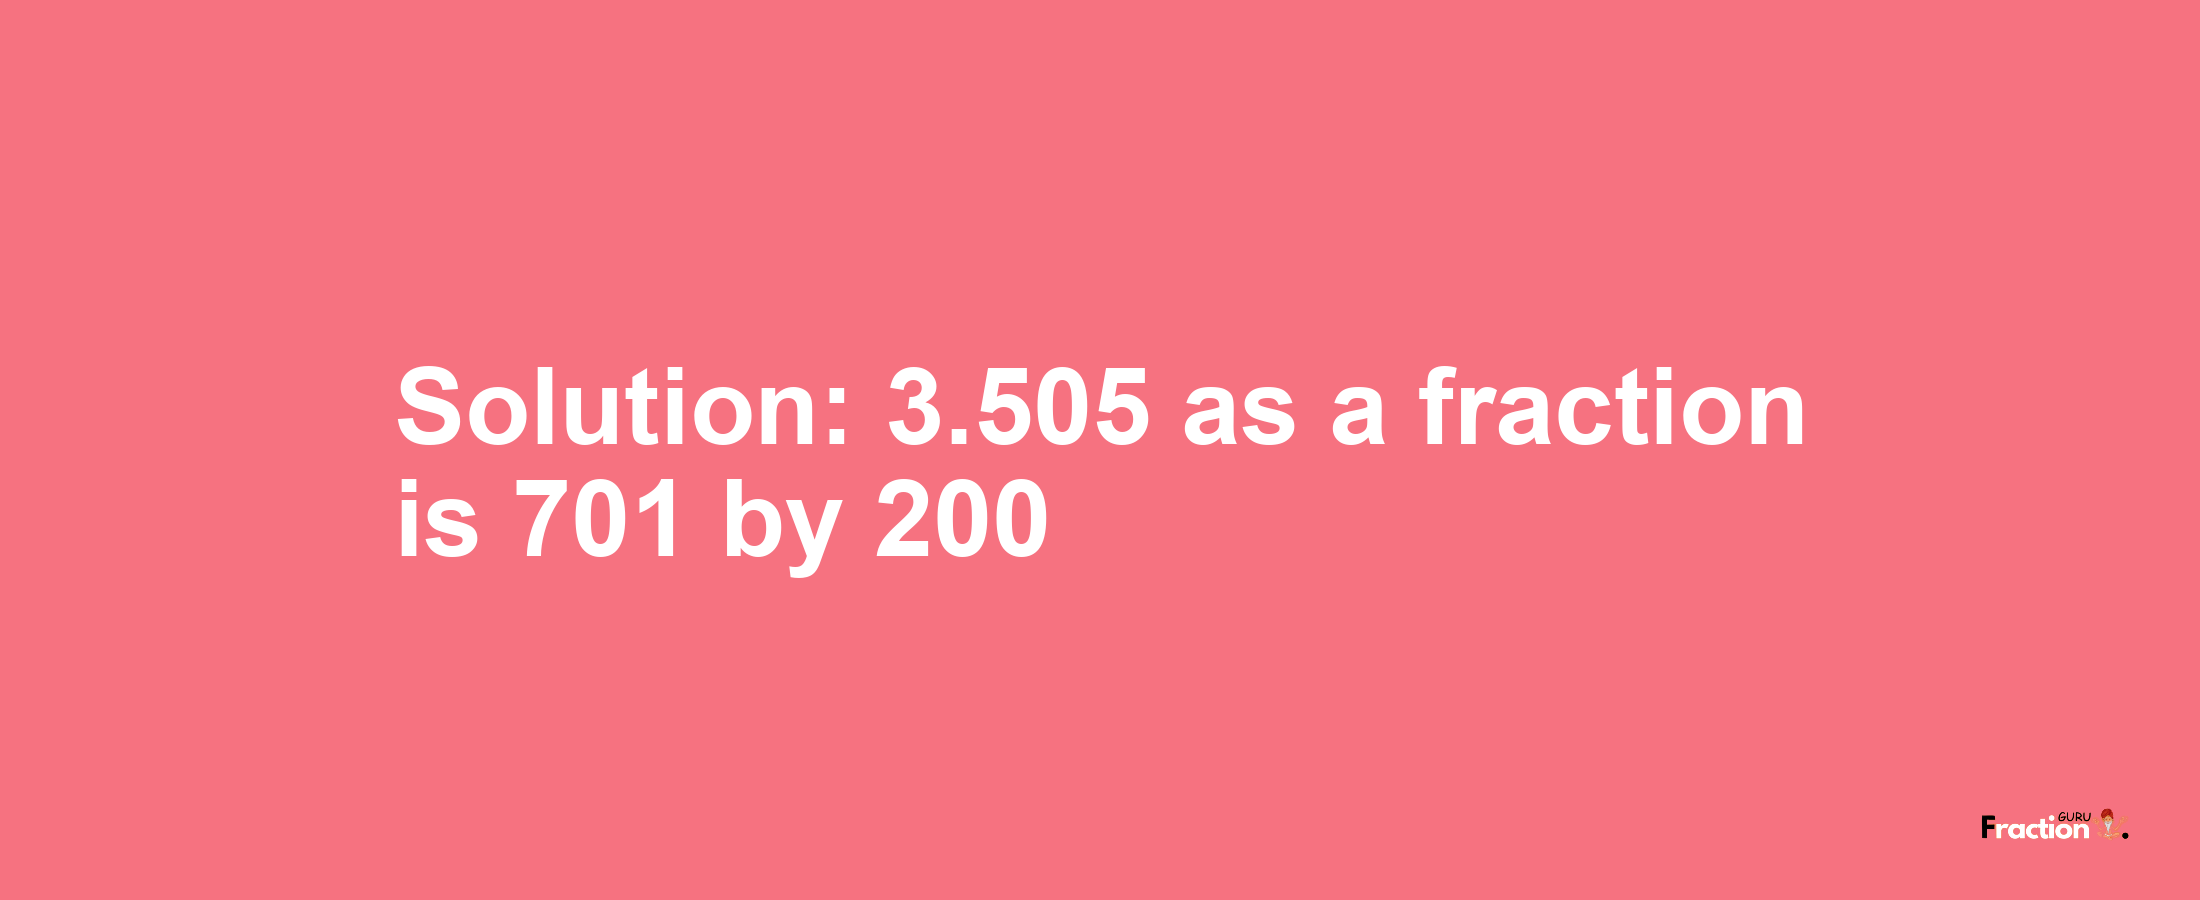 Solution:3.505 as a fraction is 701/200